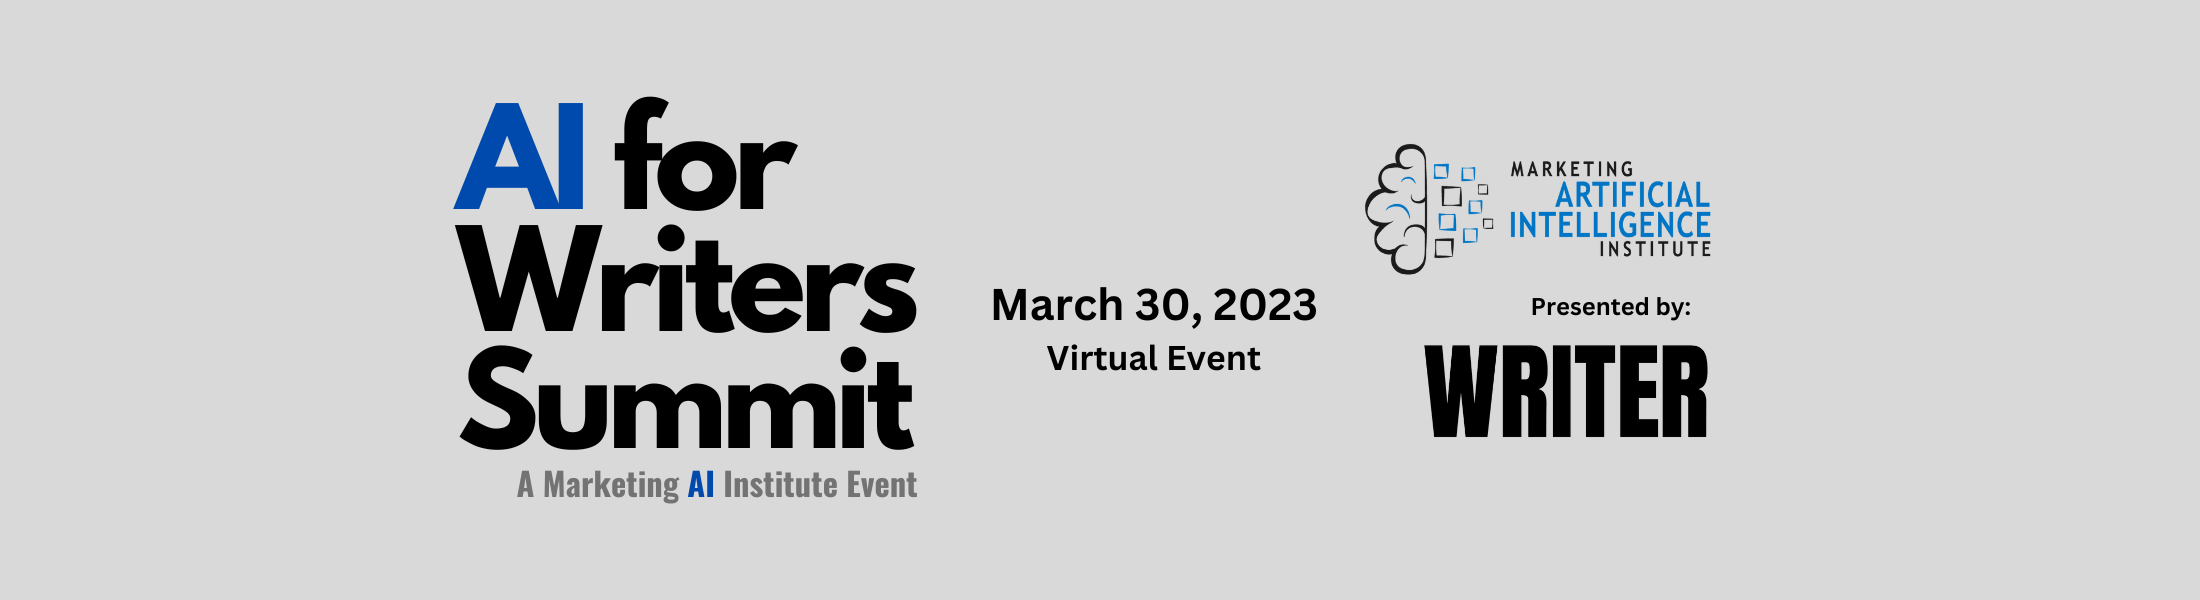 AI for Writers Summit Presented by Writer